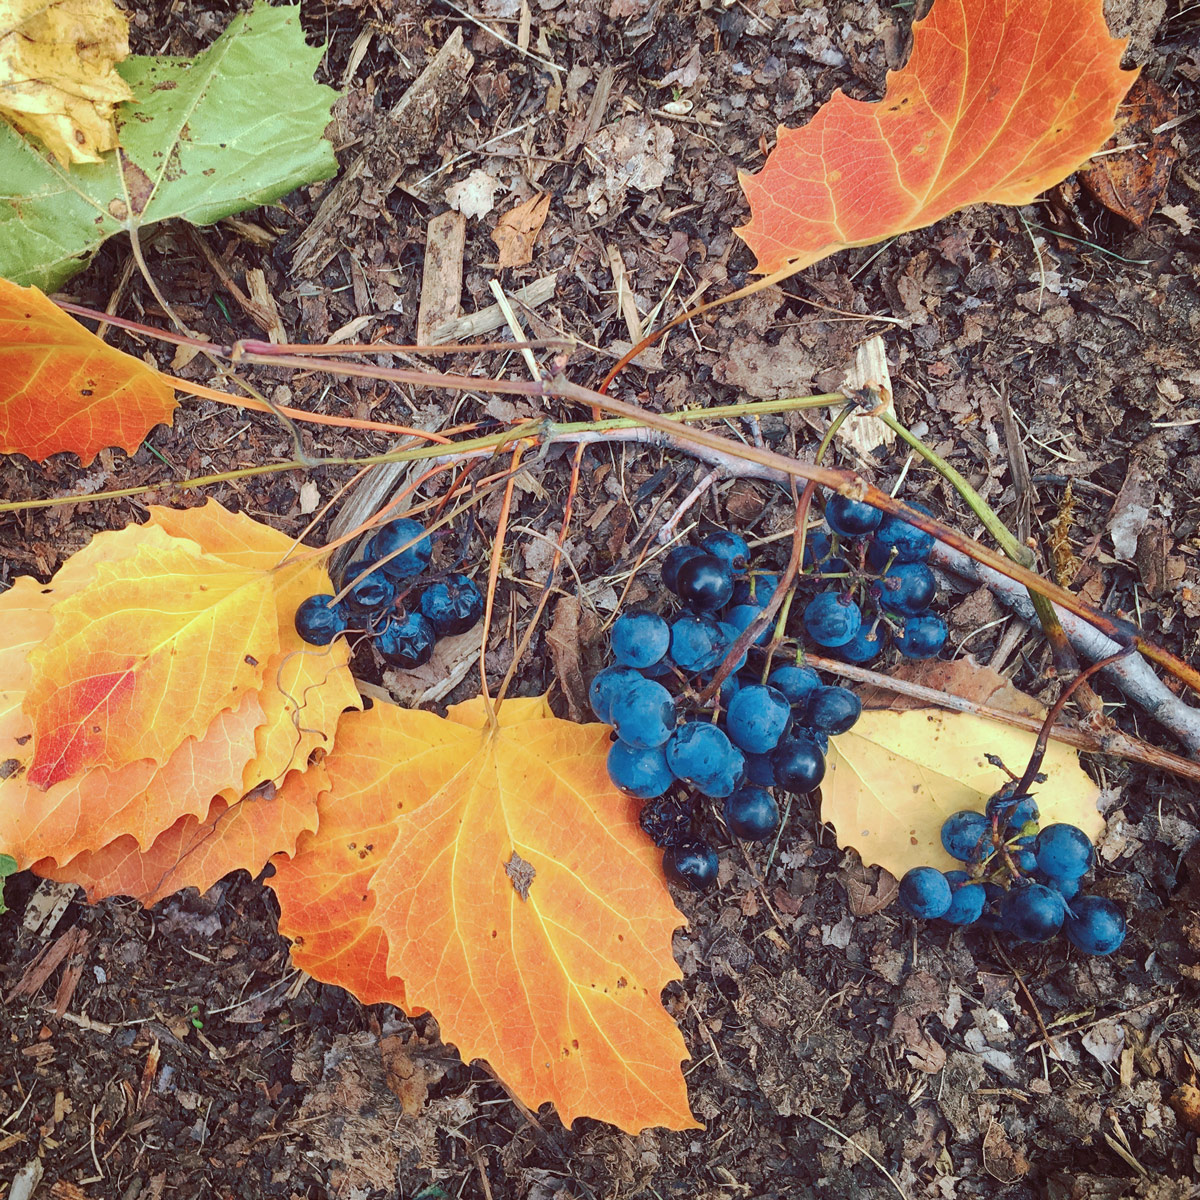 Vitis riparia—the riverbank grape, not used for wine—and aspen leaves in my autumn yard